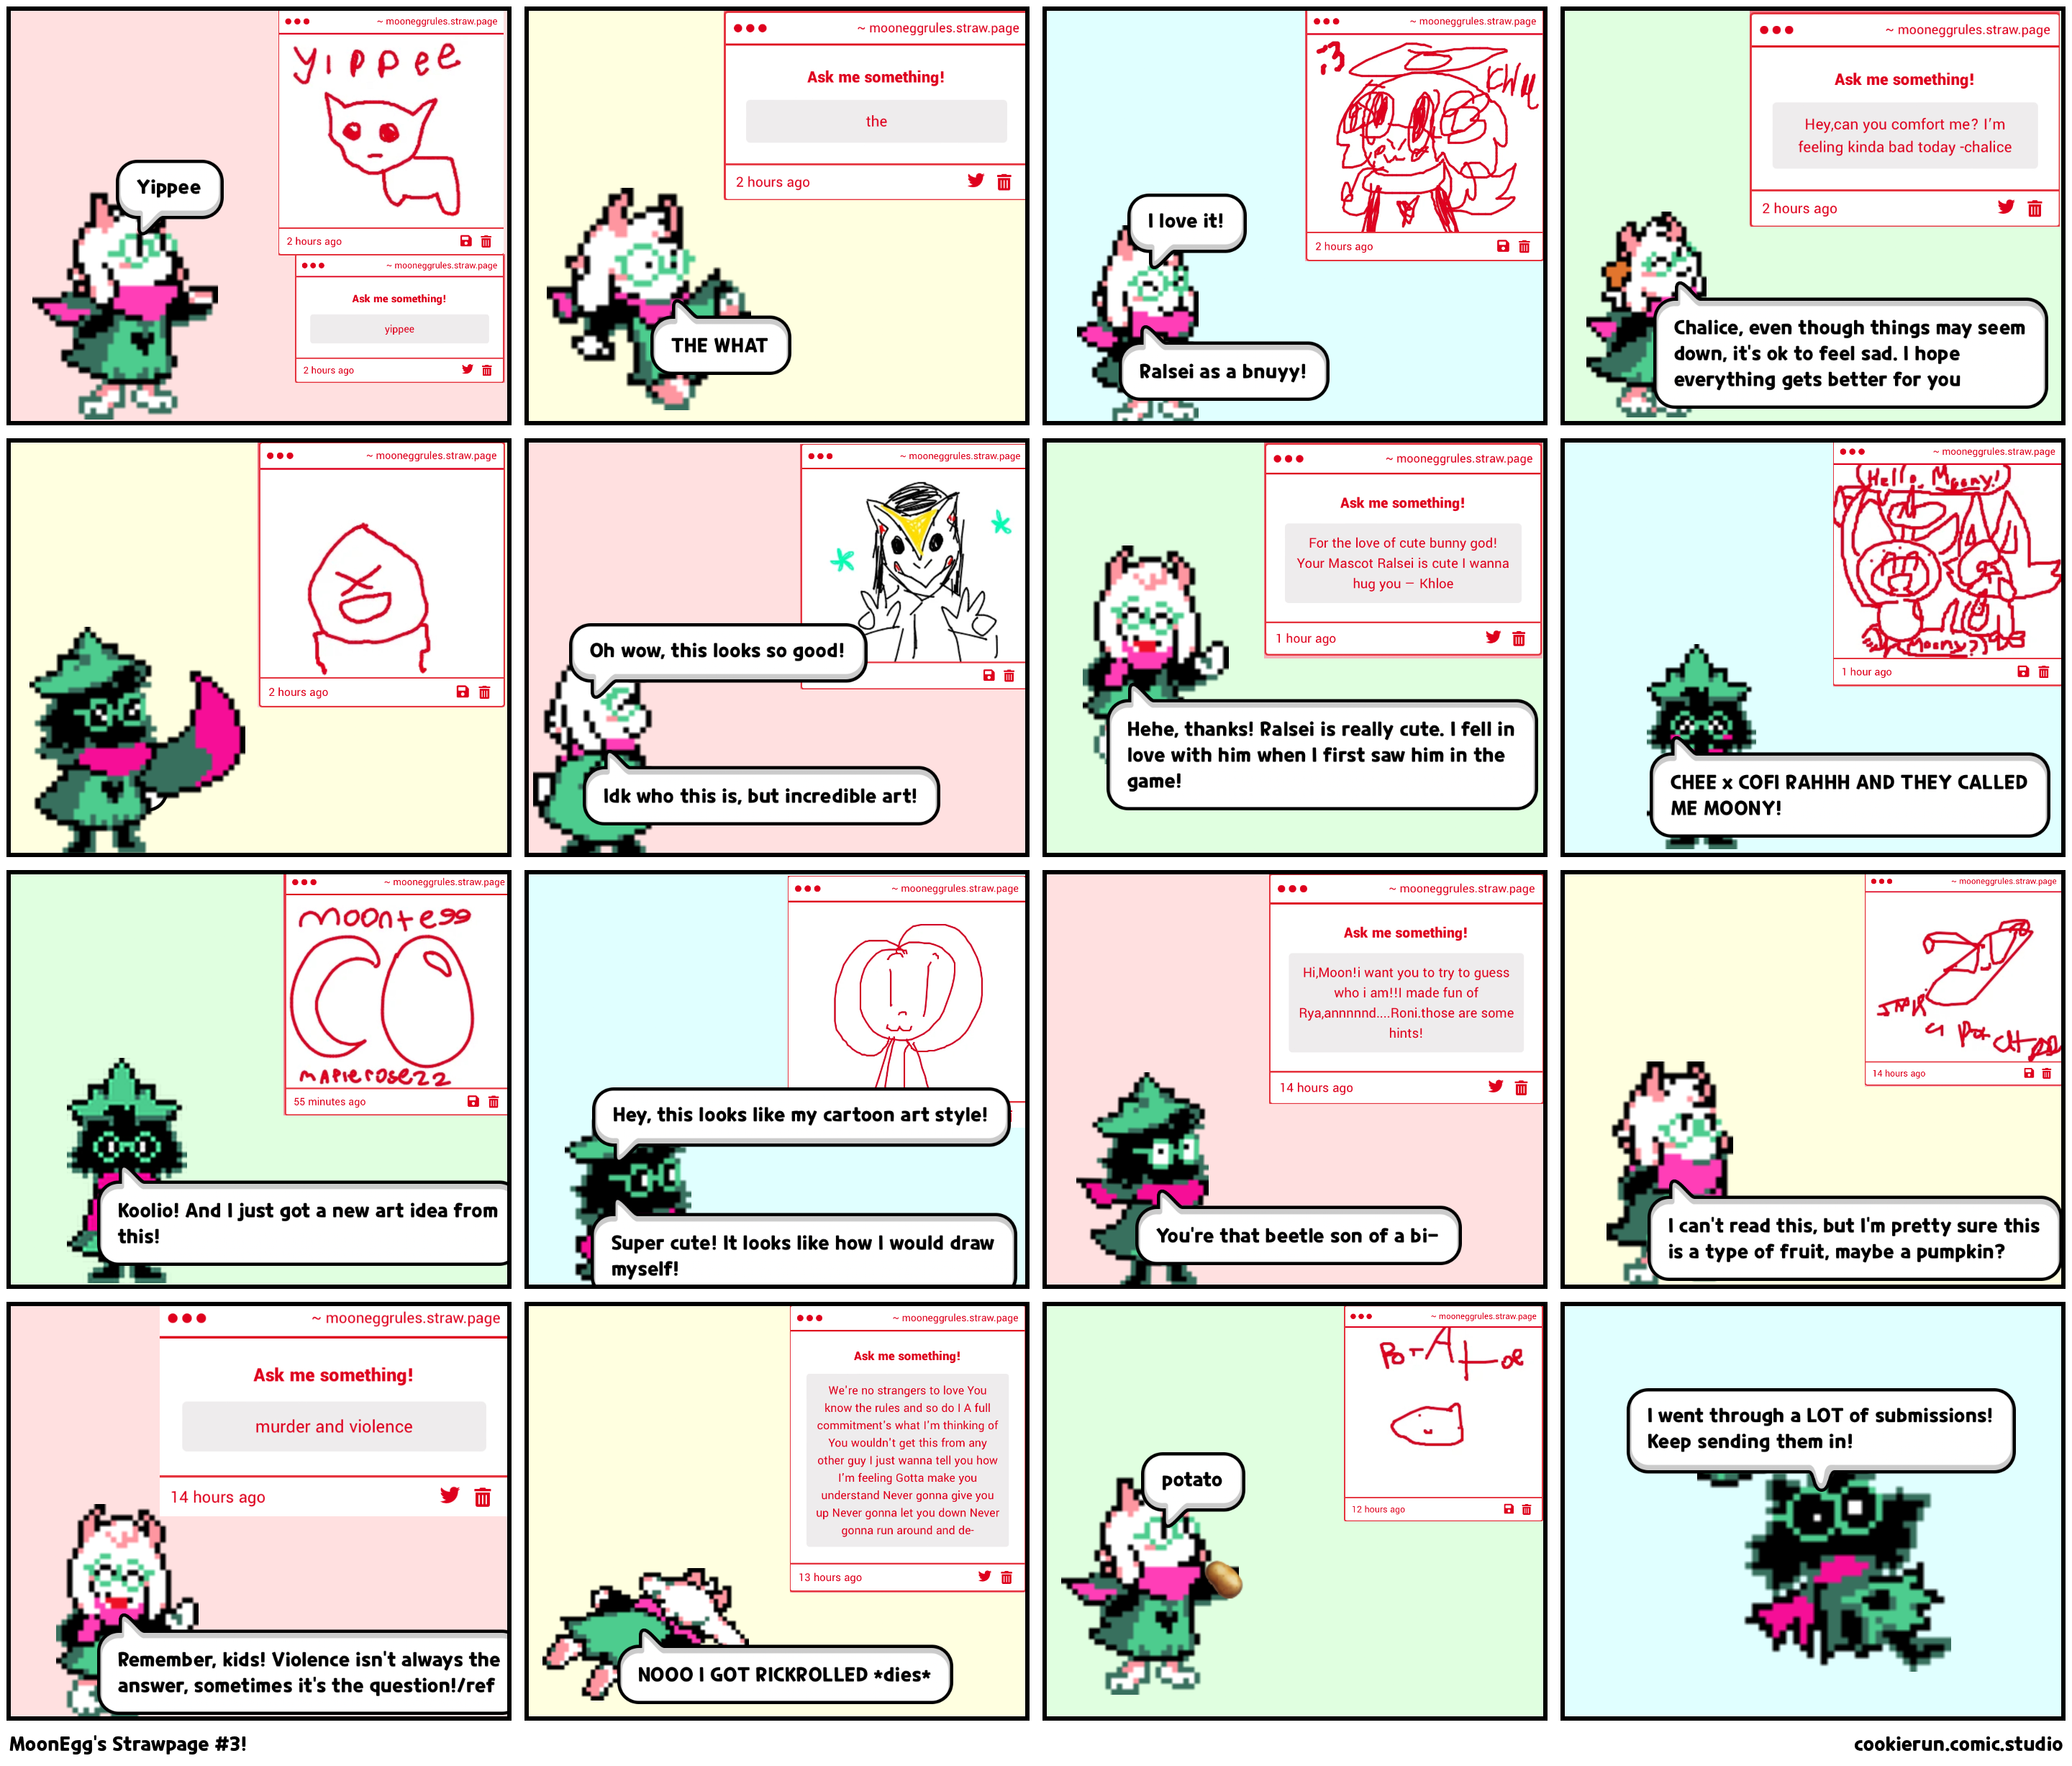 MoonEgg’s Strawpage #3!